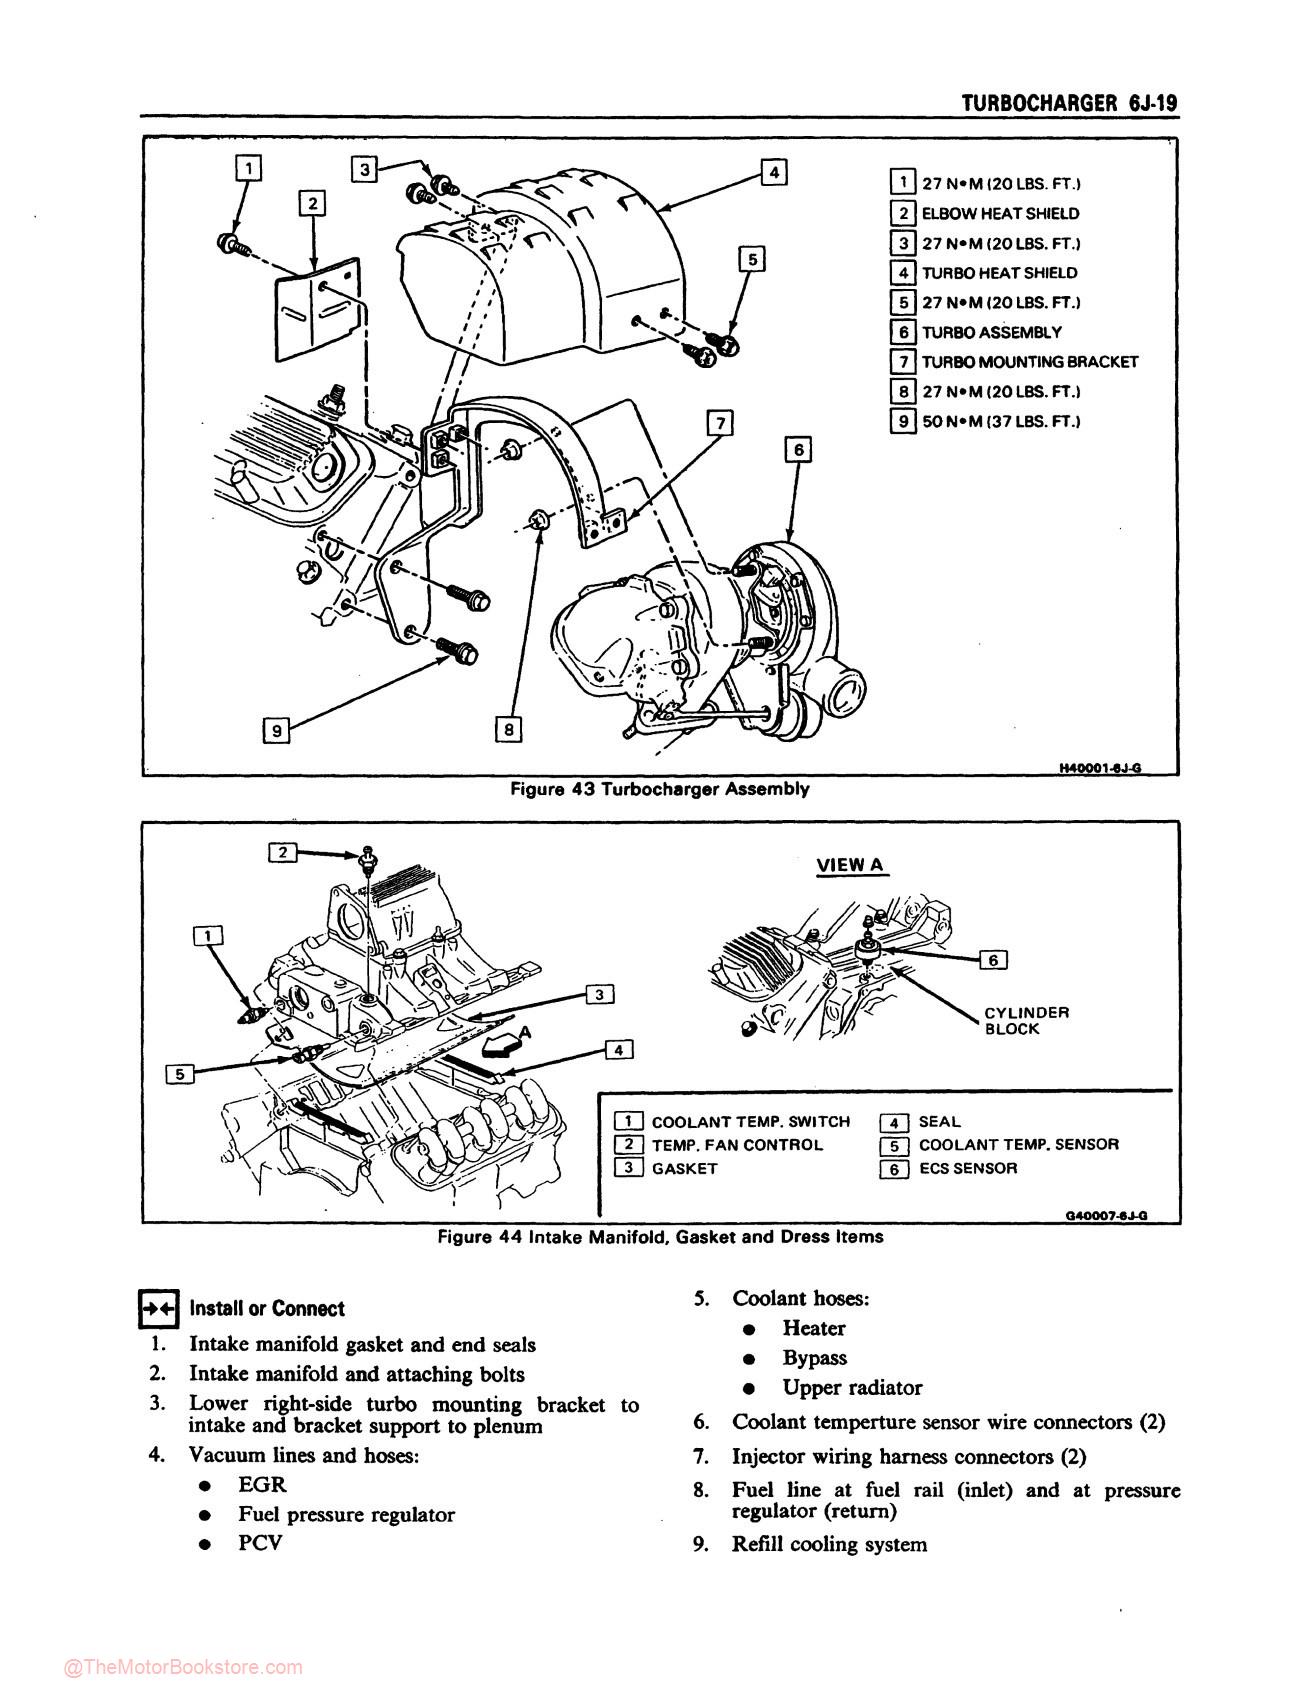 1987 Buick and Grand National Service Manual - Sample Page 4